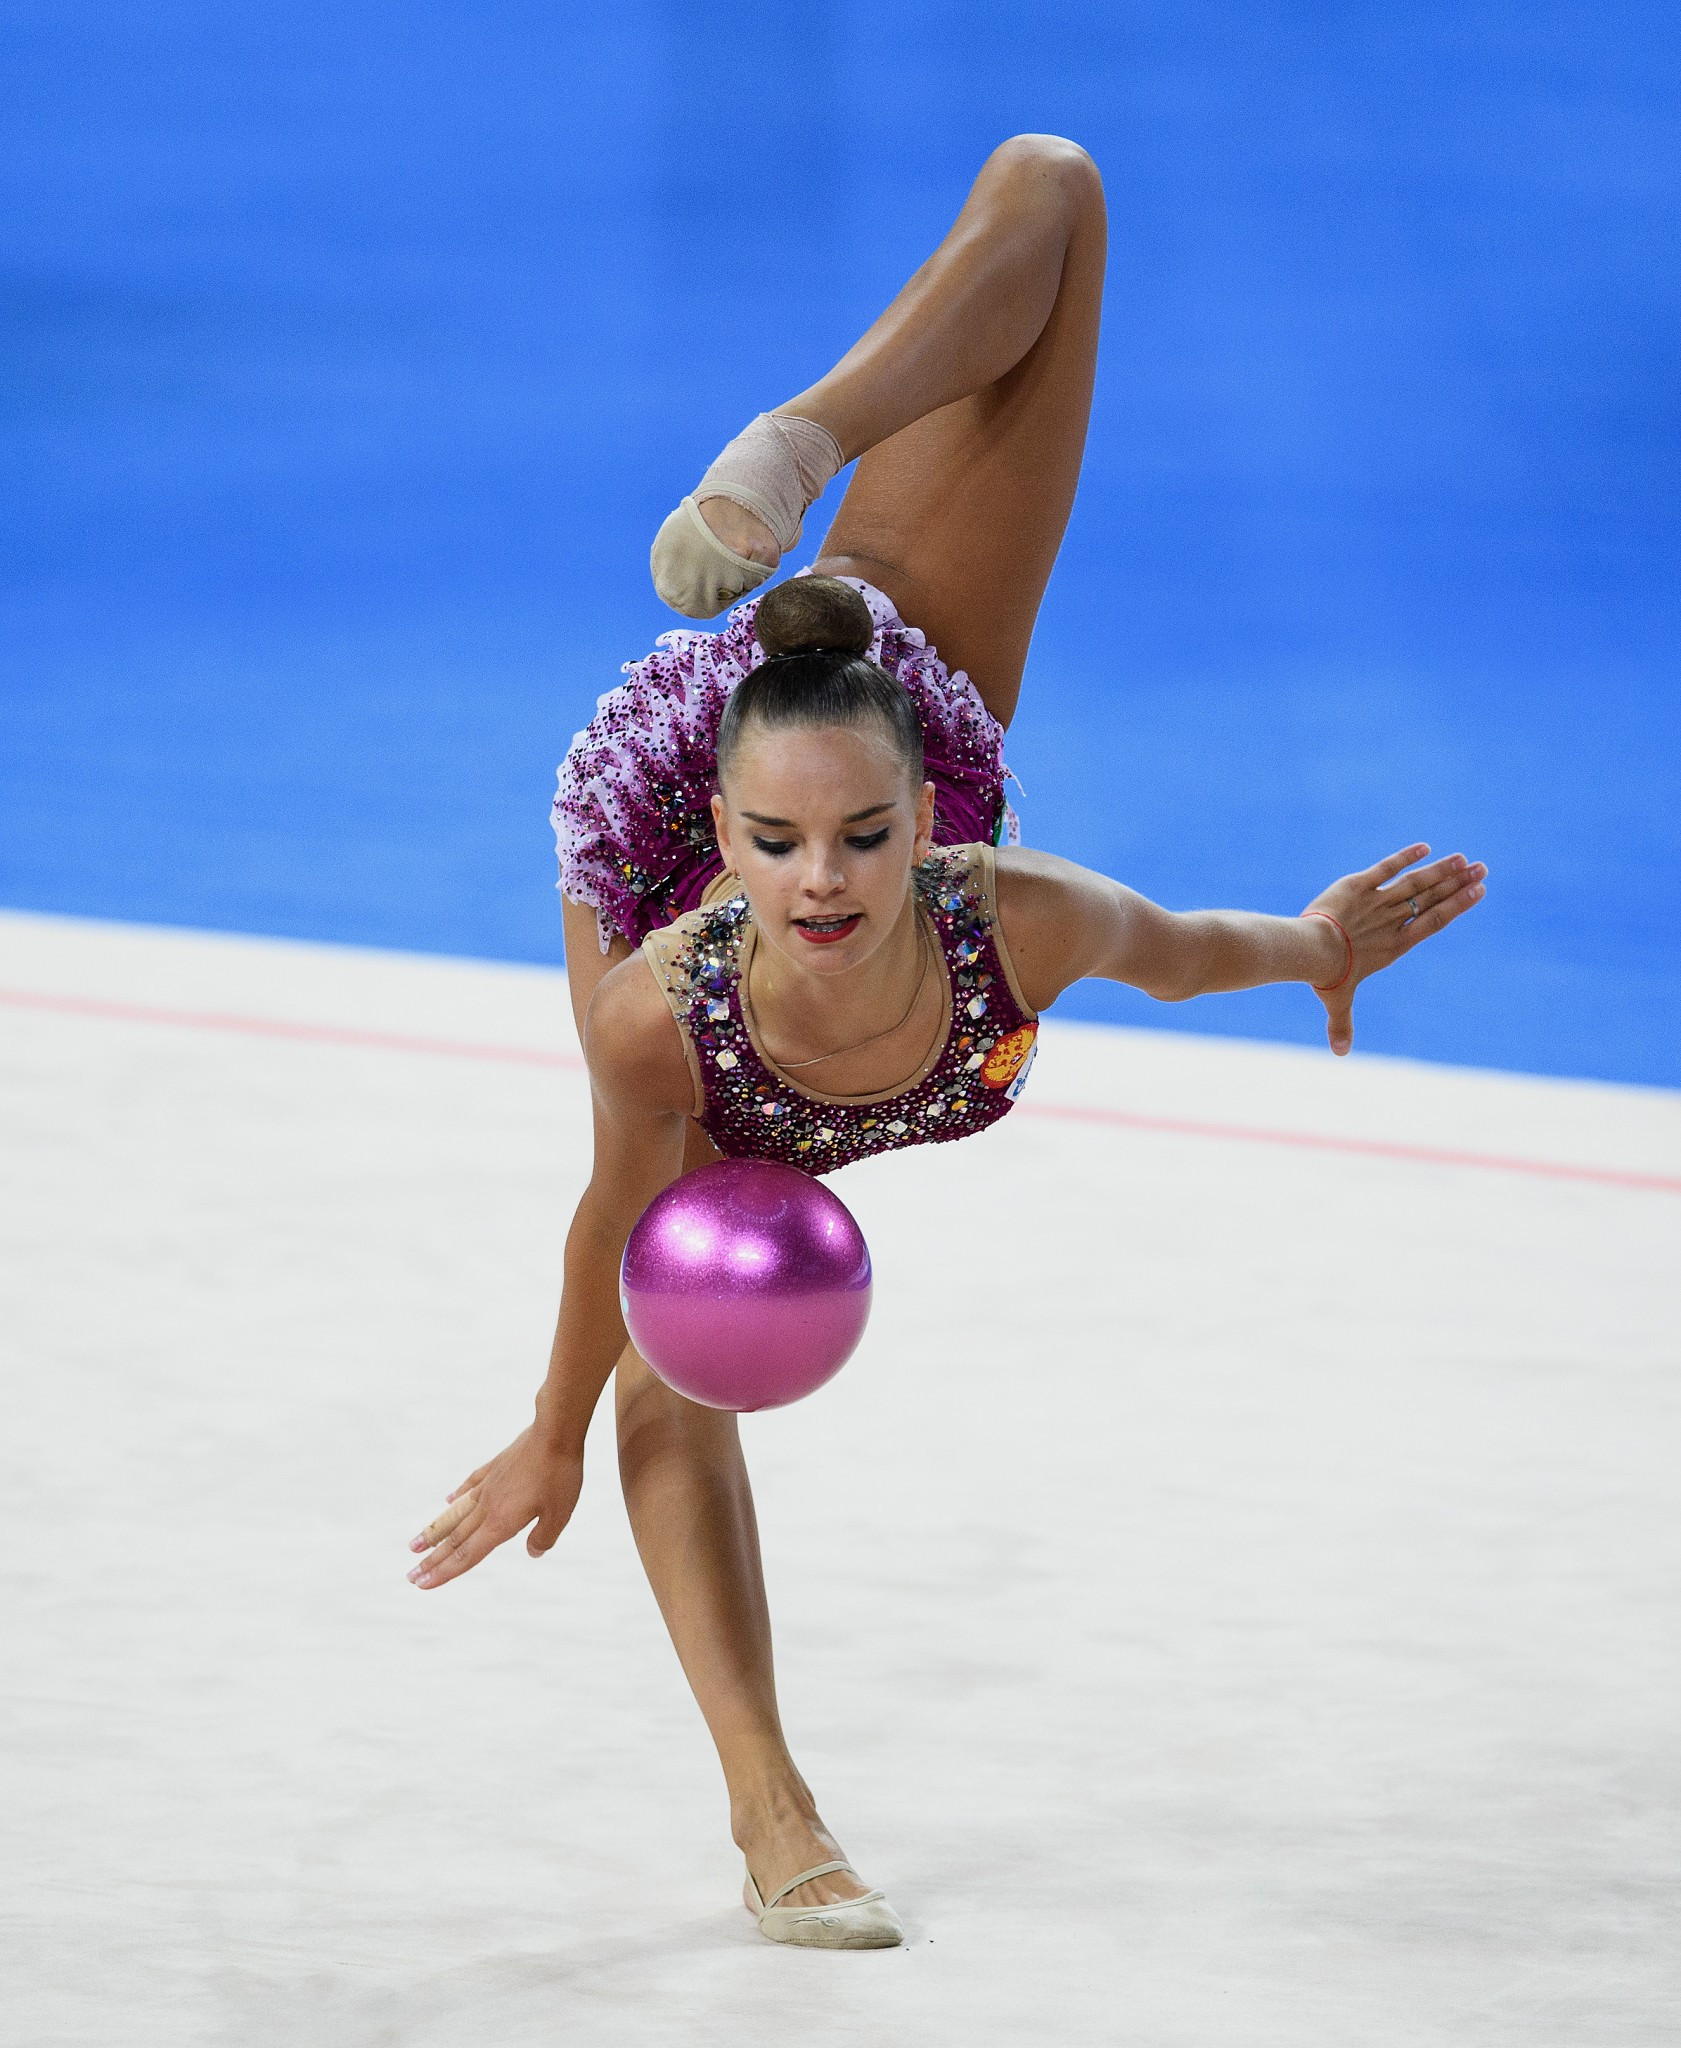 Dina Averina led the competition throughout ©Getty Images